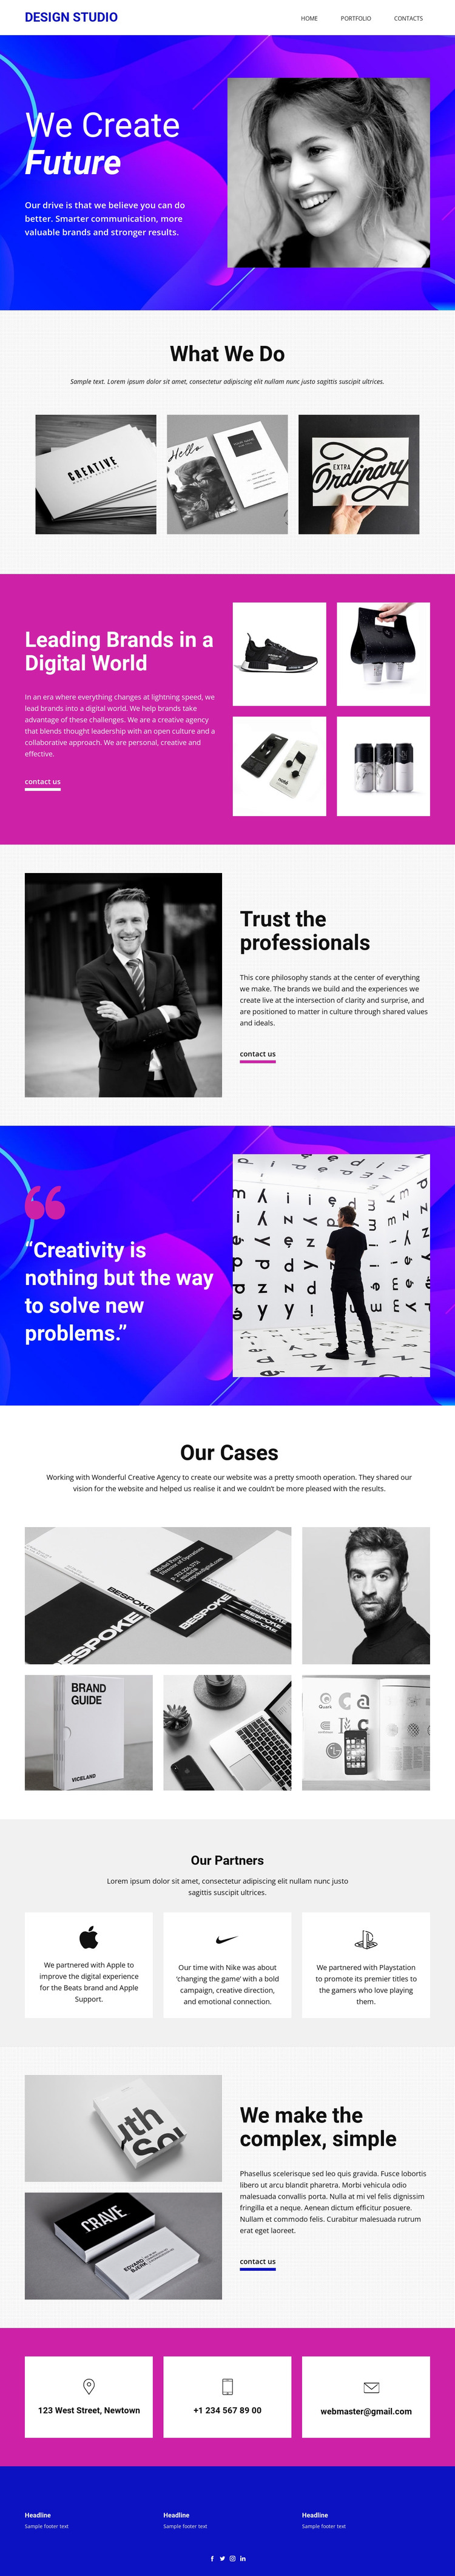 We develop the brand’s core HTML Template